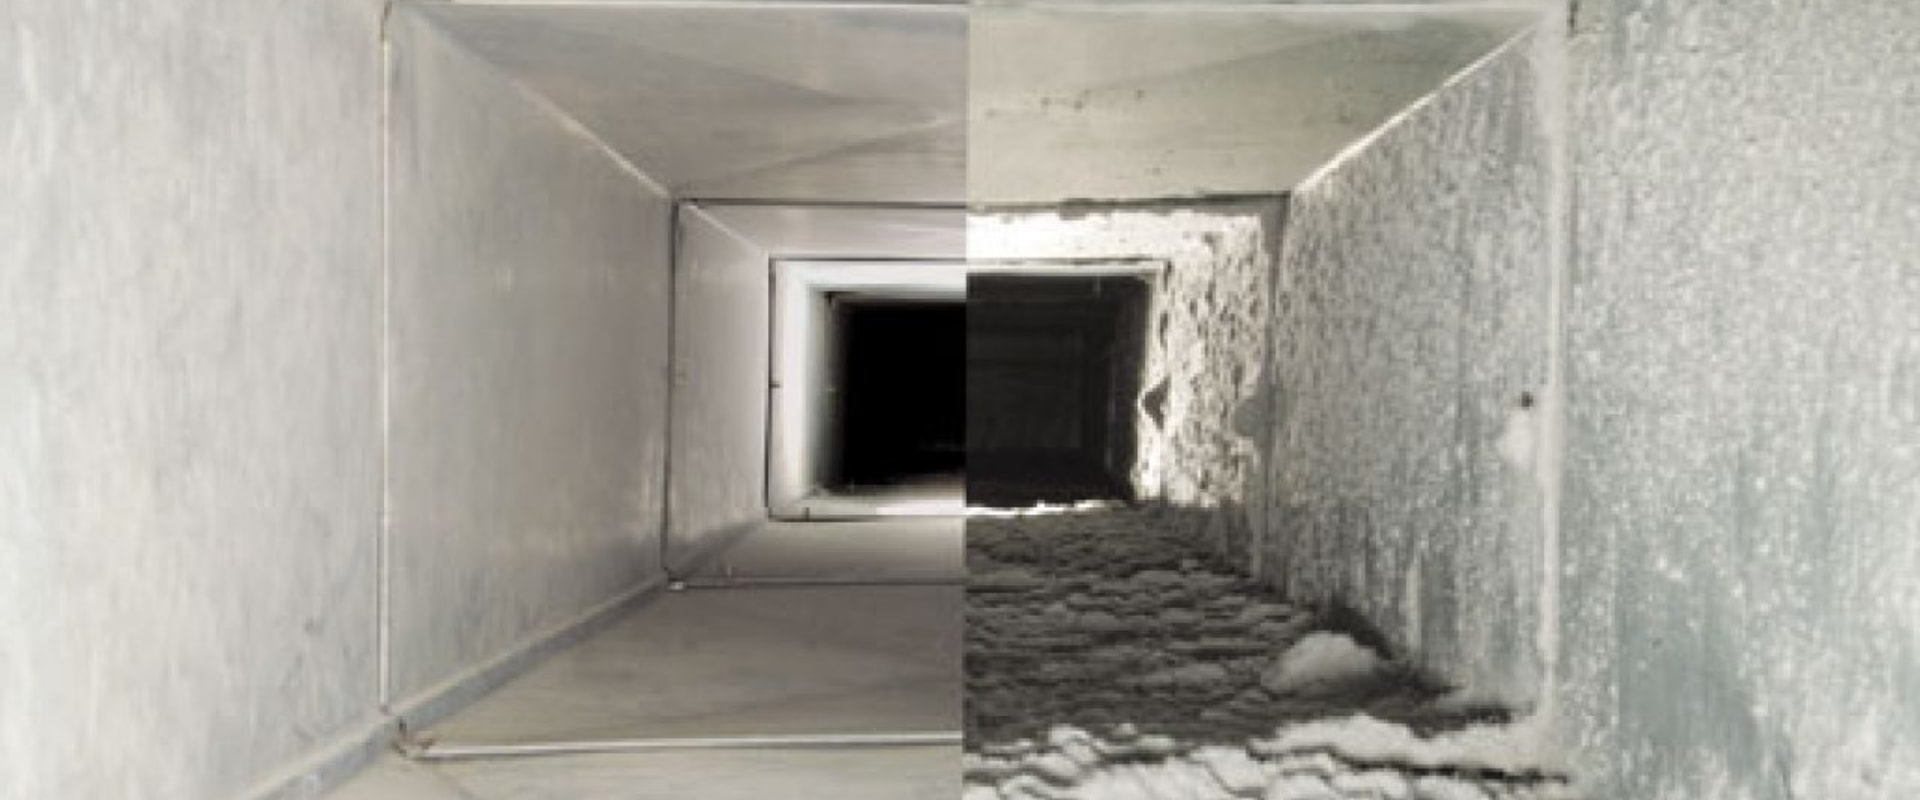 Safely Removing Mold from Air Ducts: A Step-by-Step Guide